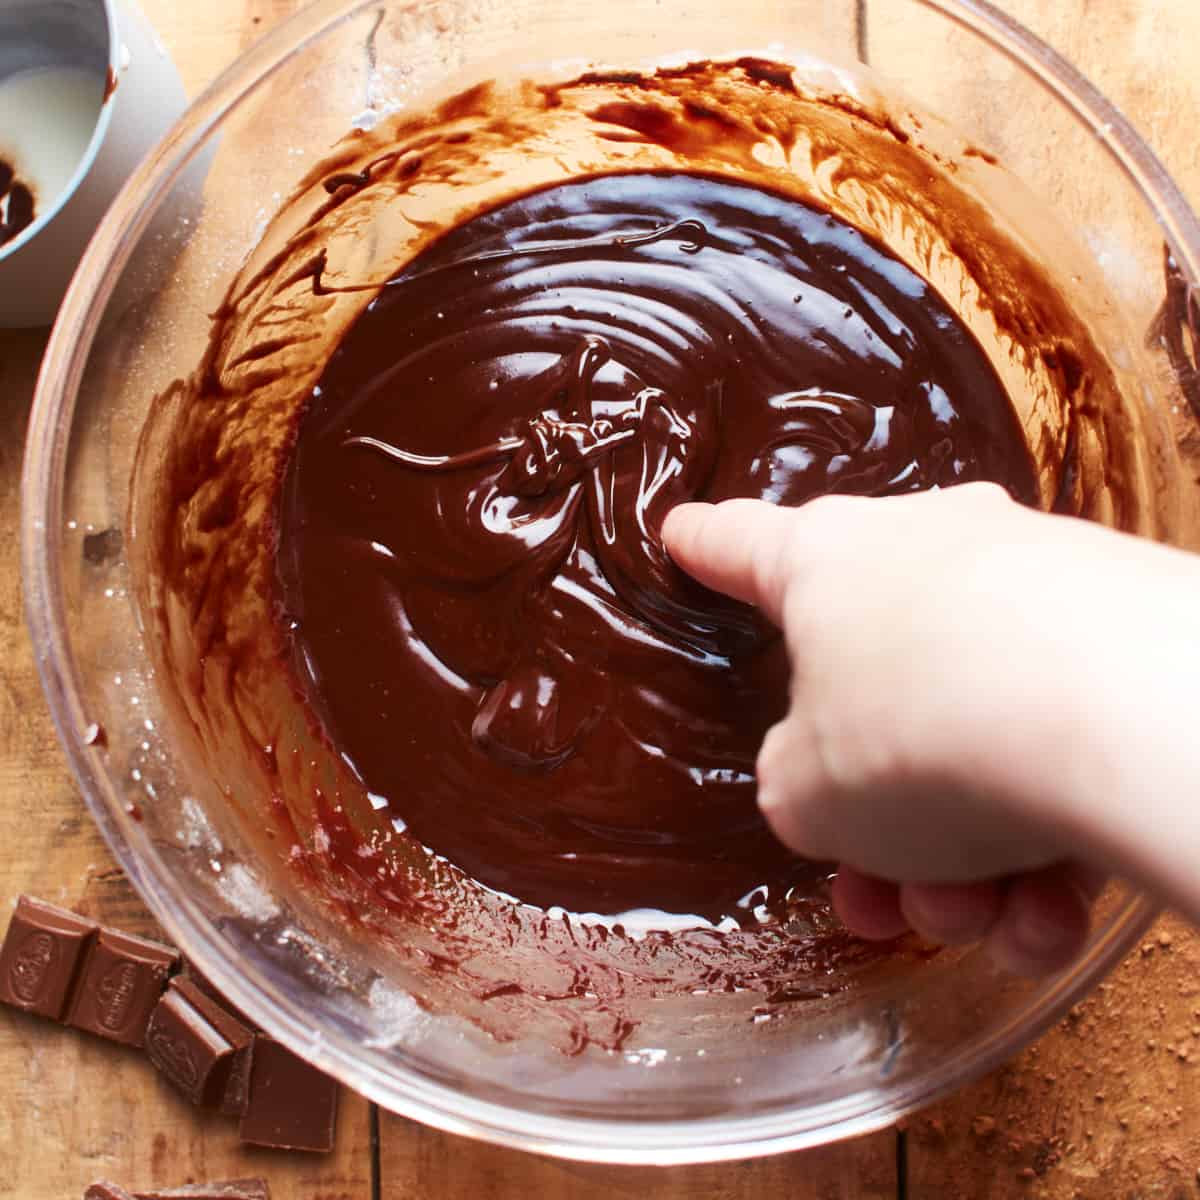 Sticking a finger in the chocolate batter